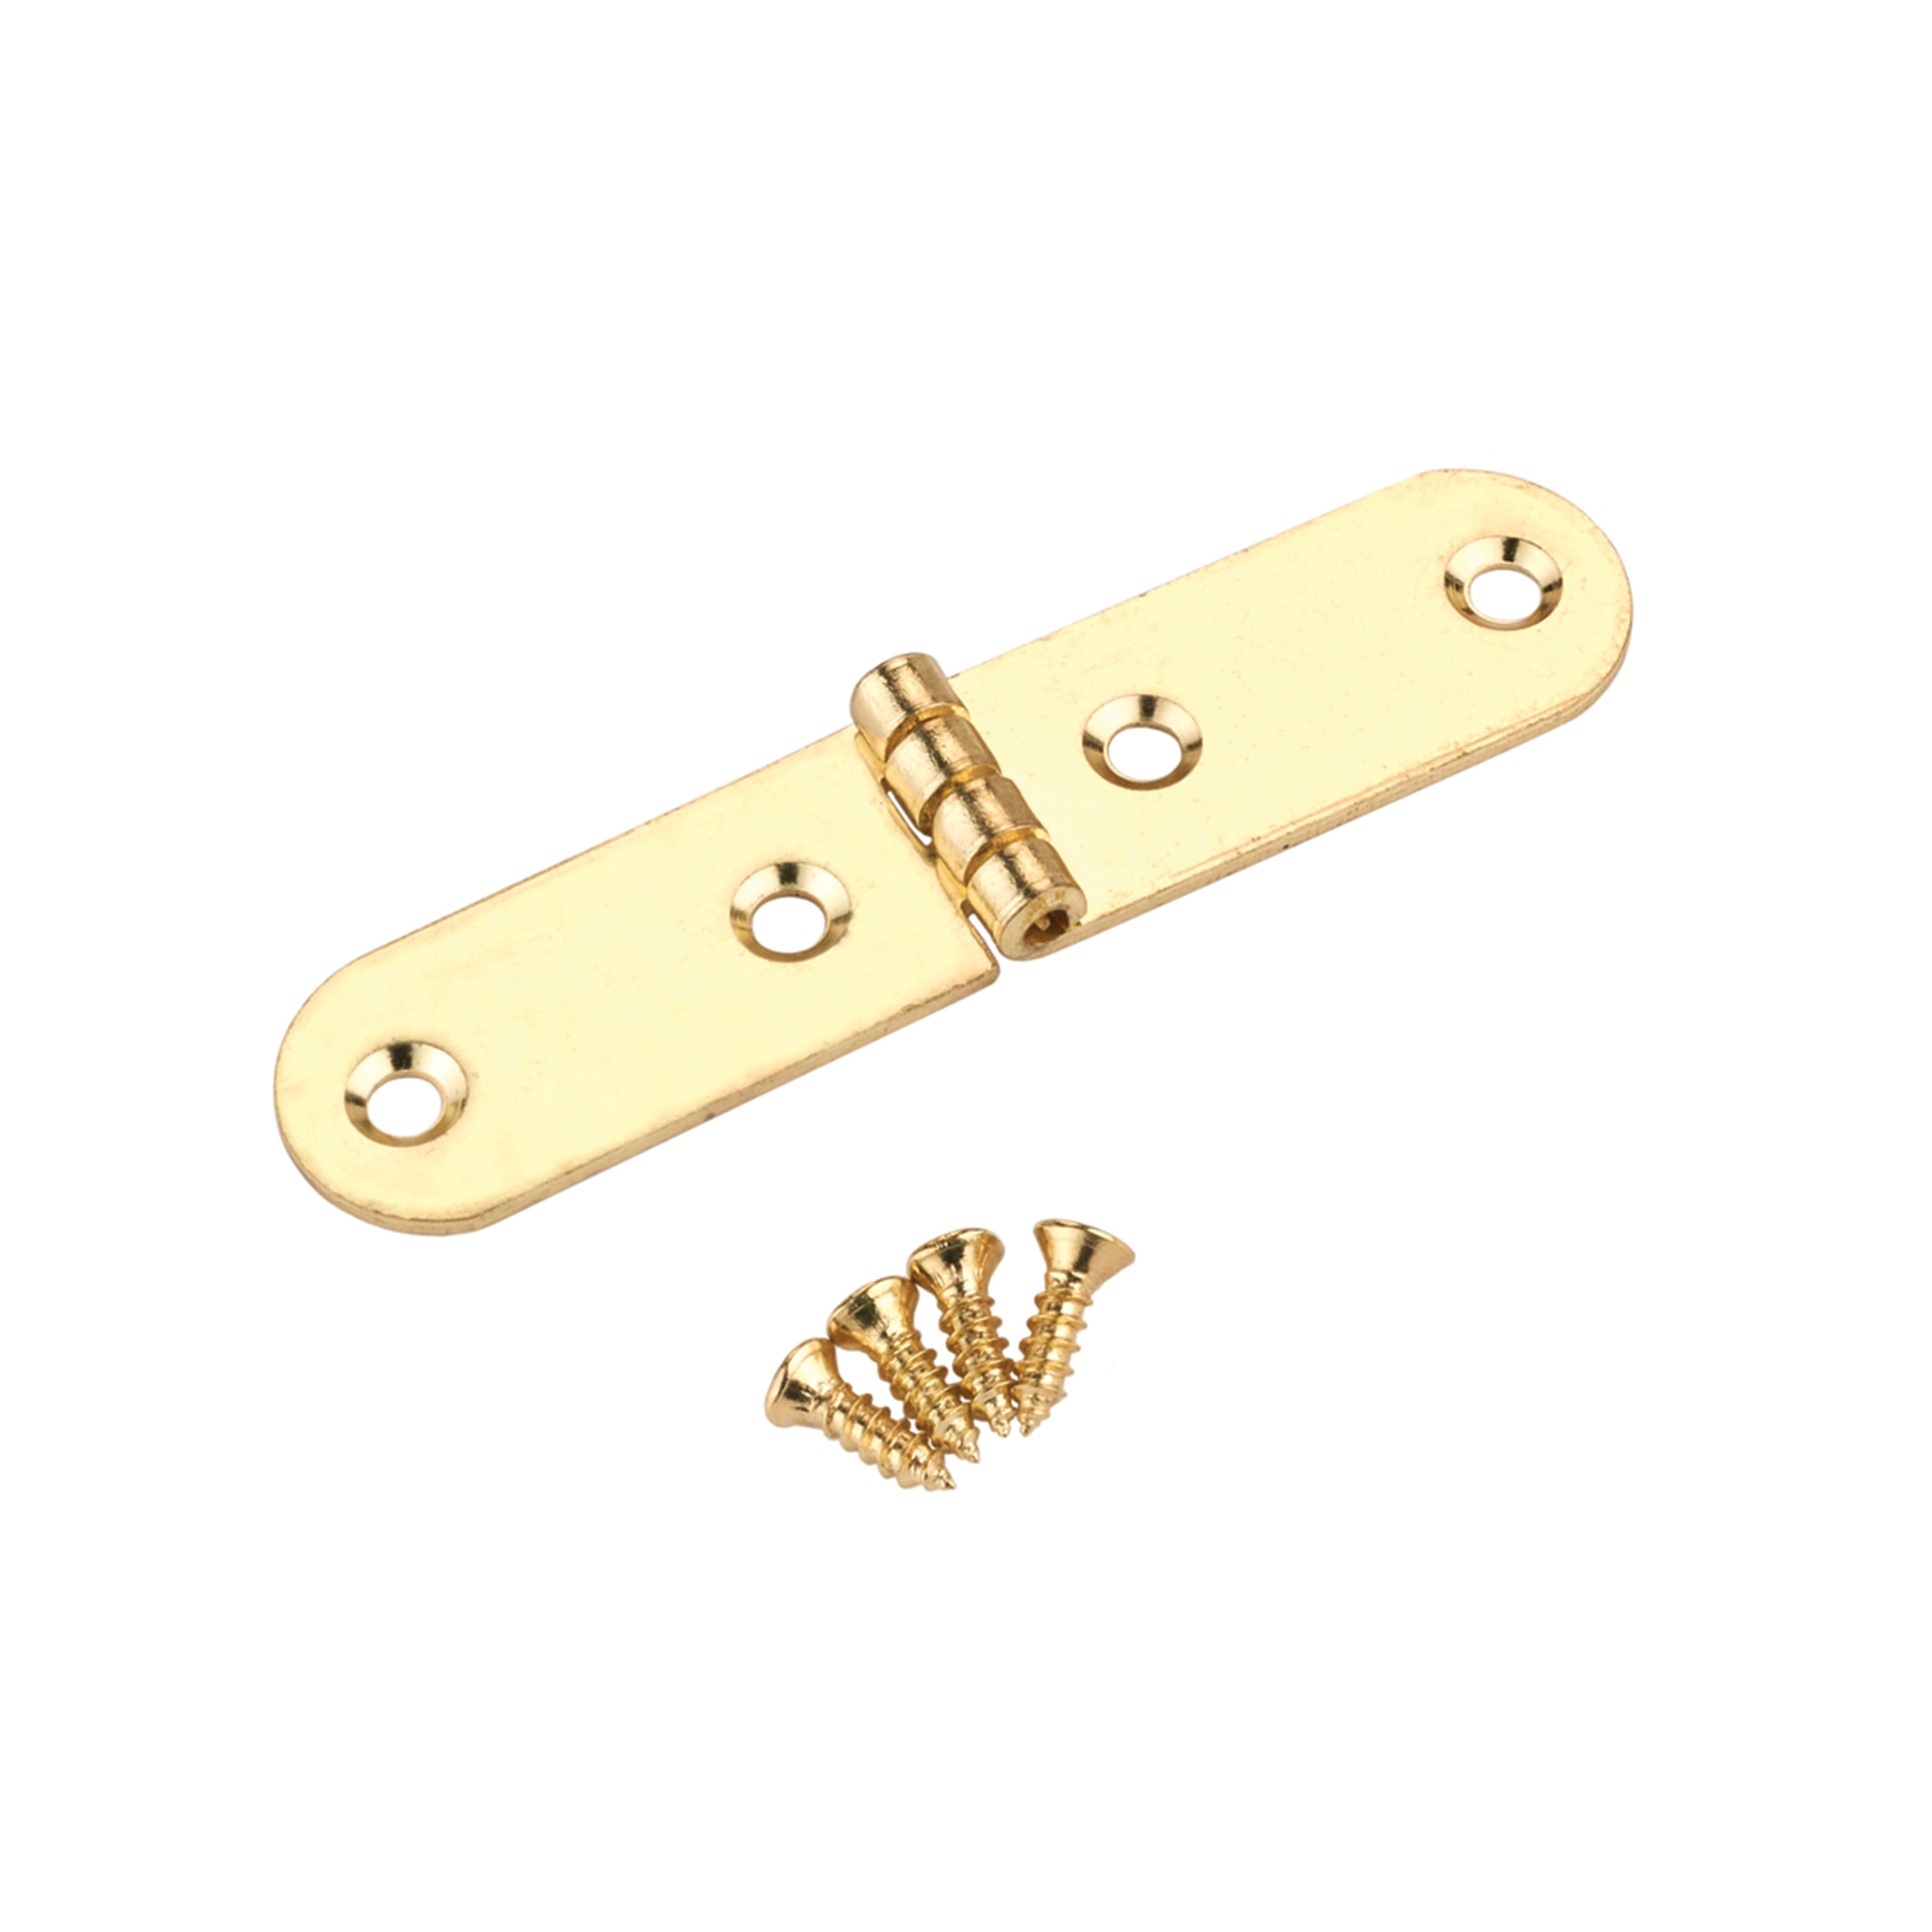 Small Utility Hinge Brass Plated 56mm X 13mm, 1 - Piece